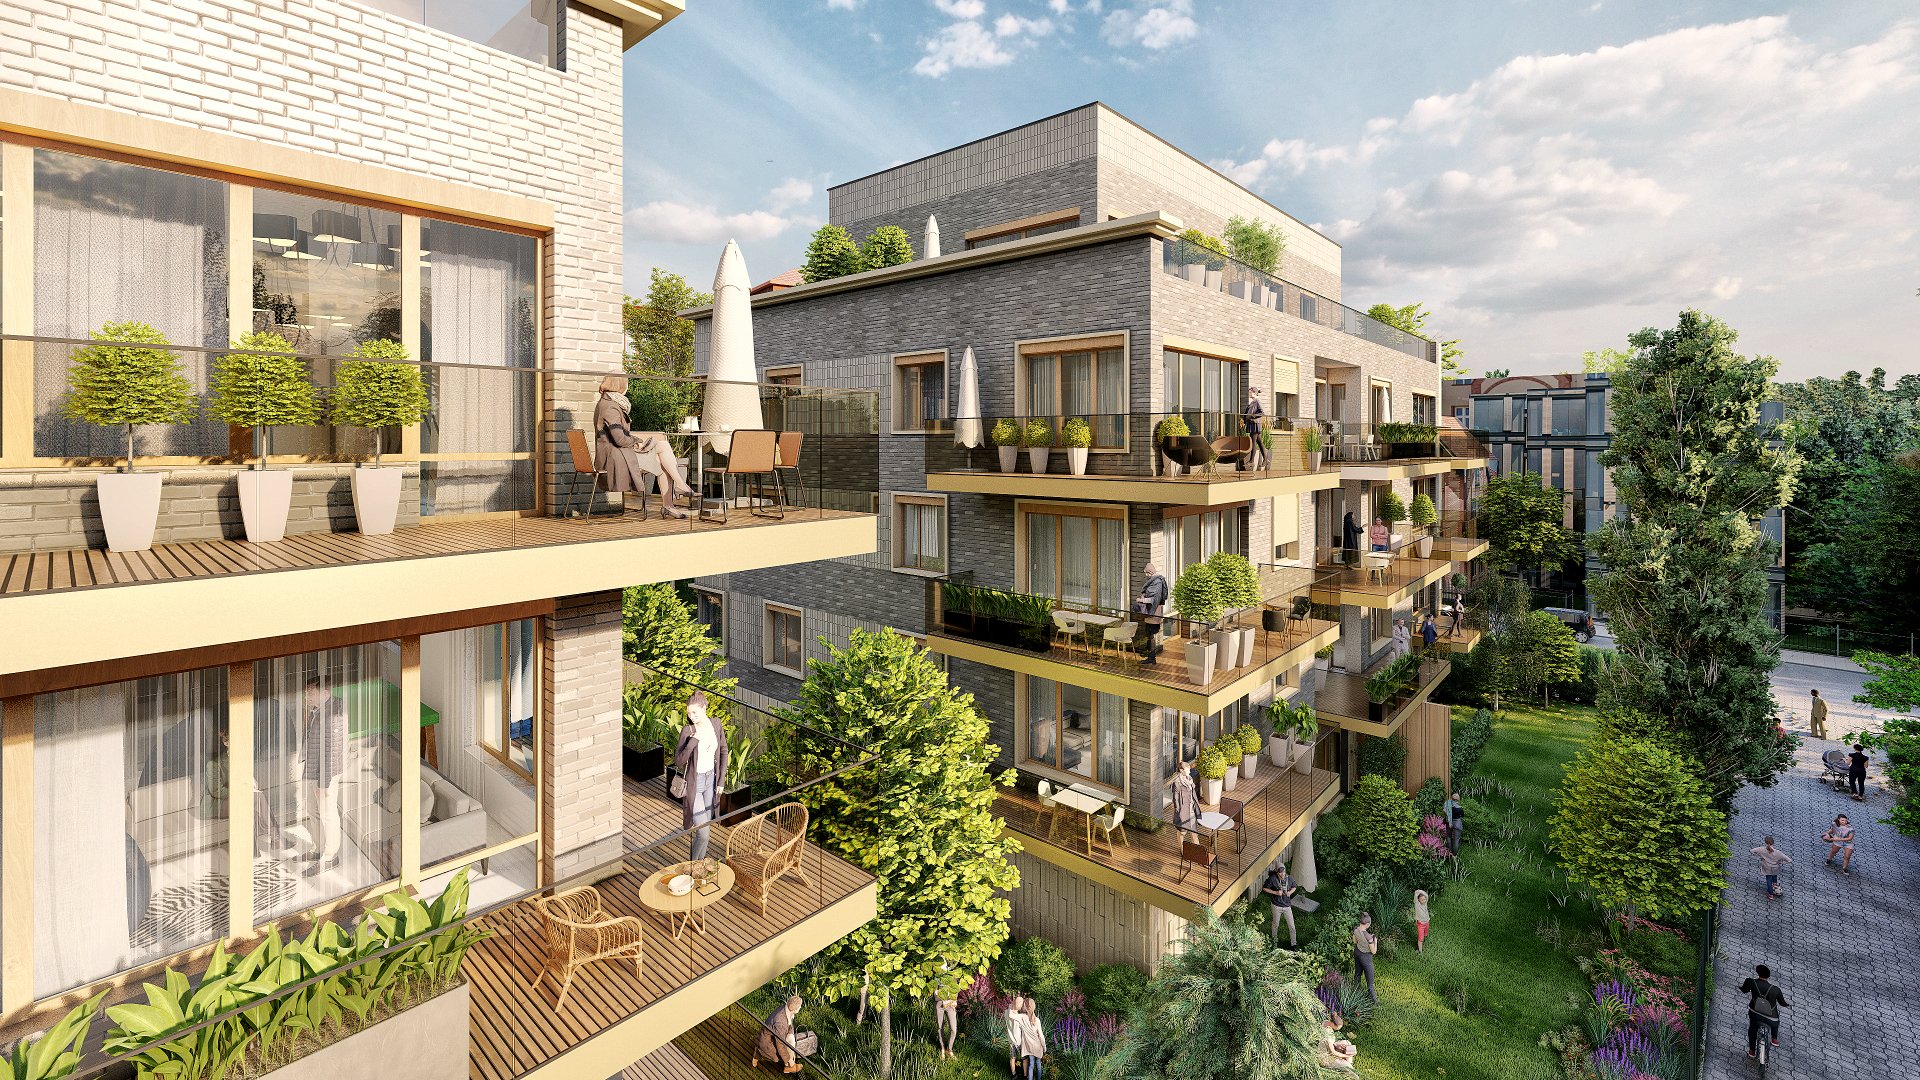 Visualisation of a new, modern residential complex. Buildings full of greenery and trees around. Happy people on the balconies. - grafika artykułu